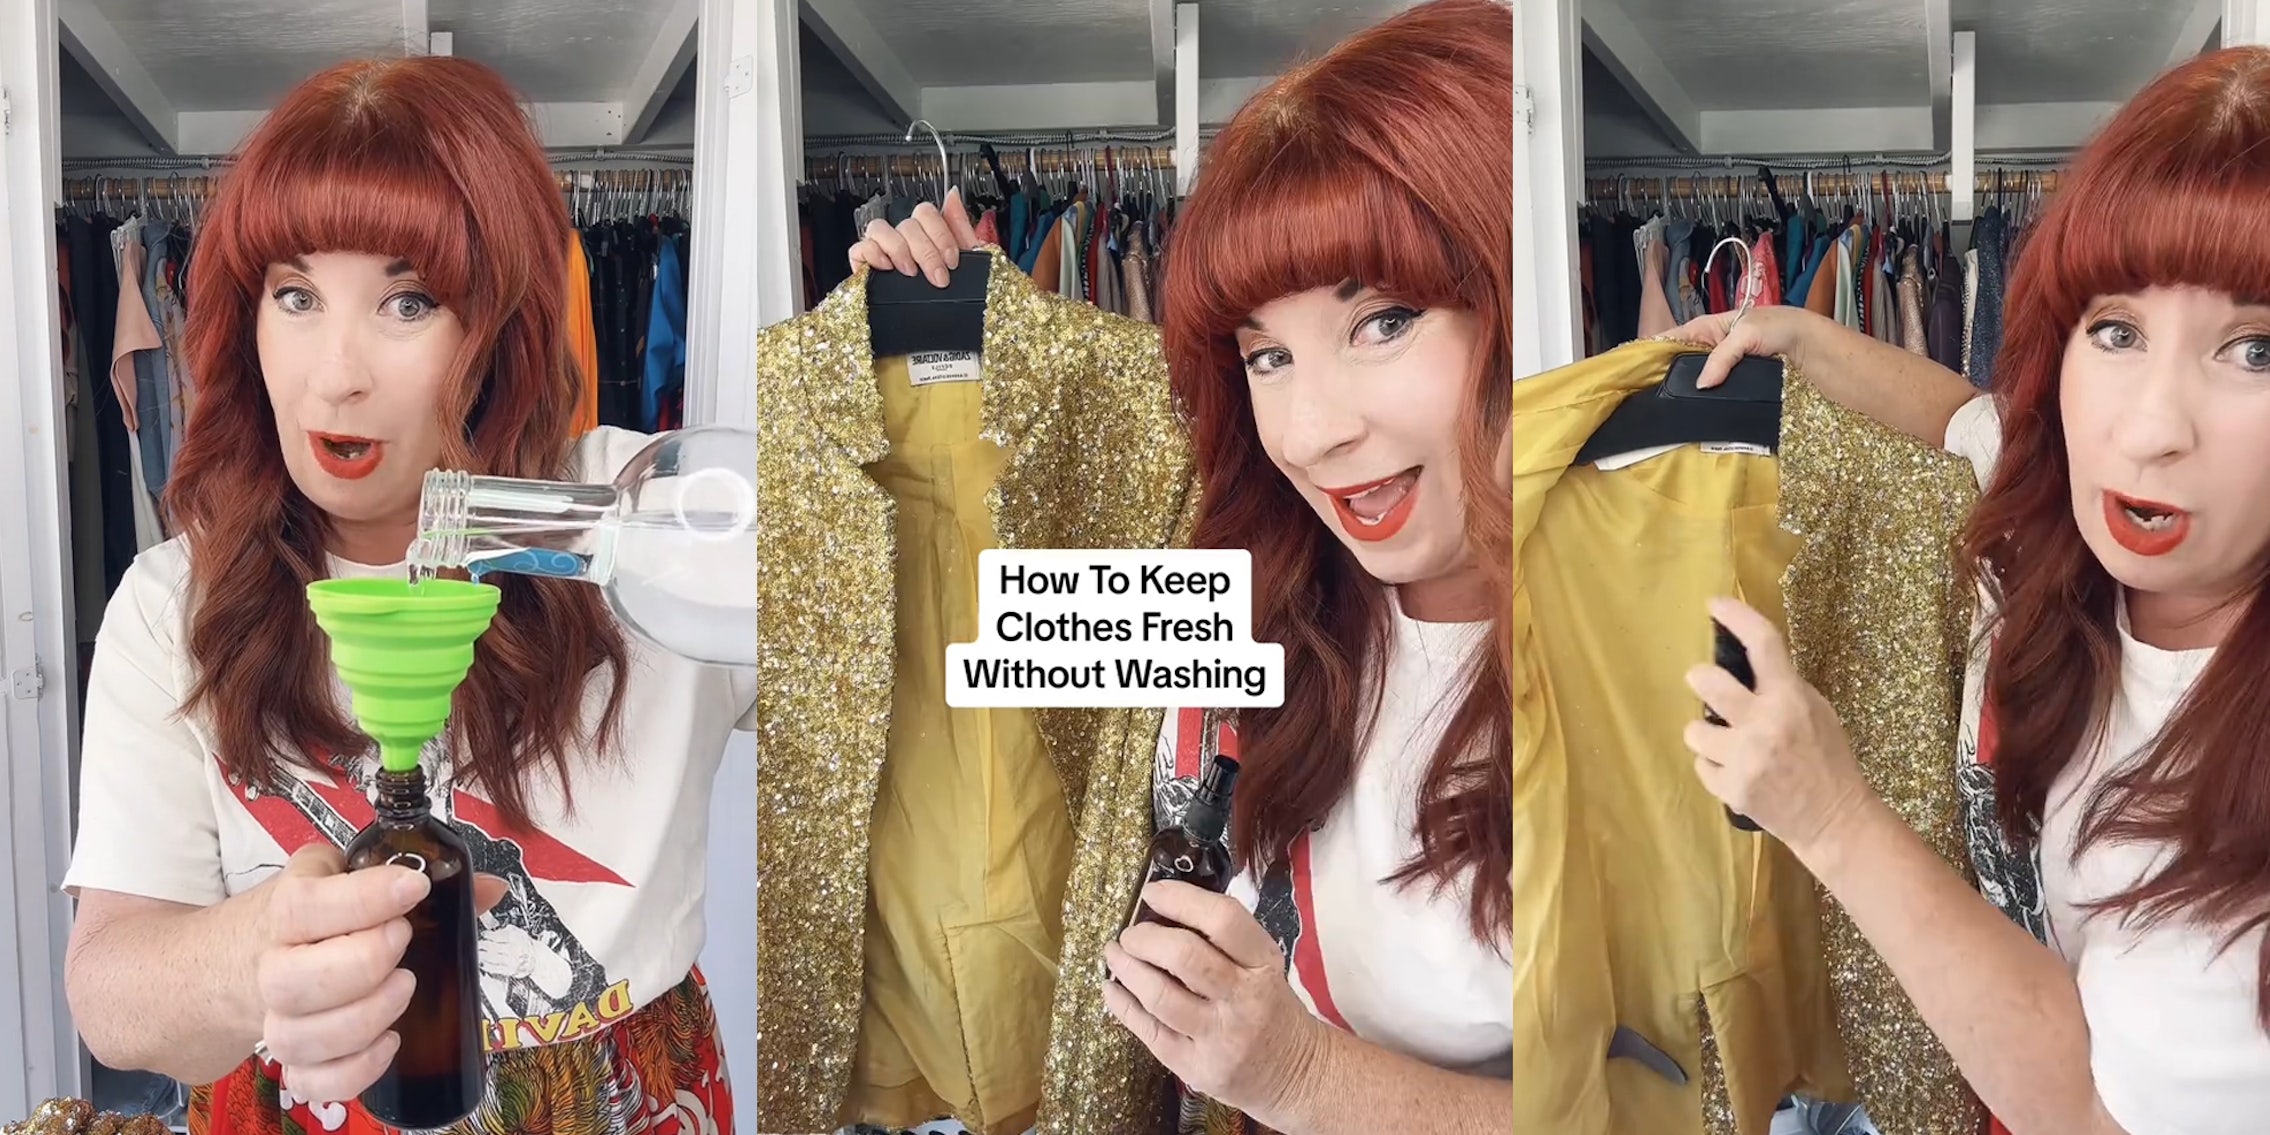 woman speaking in dressing room pouring vodka into spray bottle (l) woman speaking in dressing room with caption 'How To Keep Clothes Fresh Without Washing' (c) woman speaking in dressing room spraying inside of jacket (r)